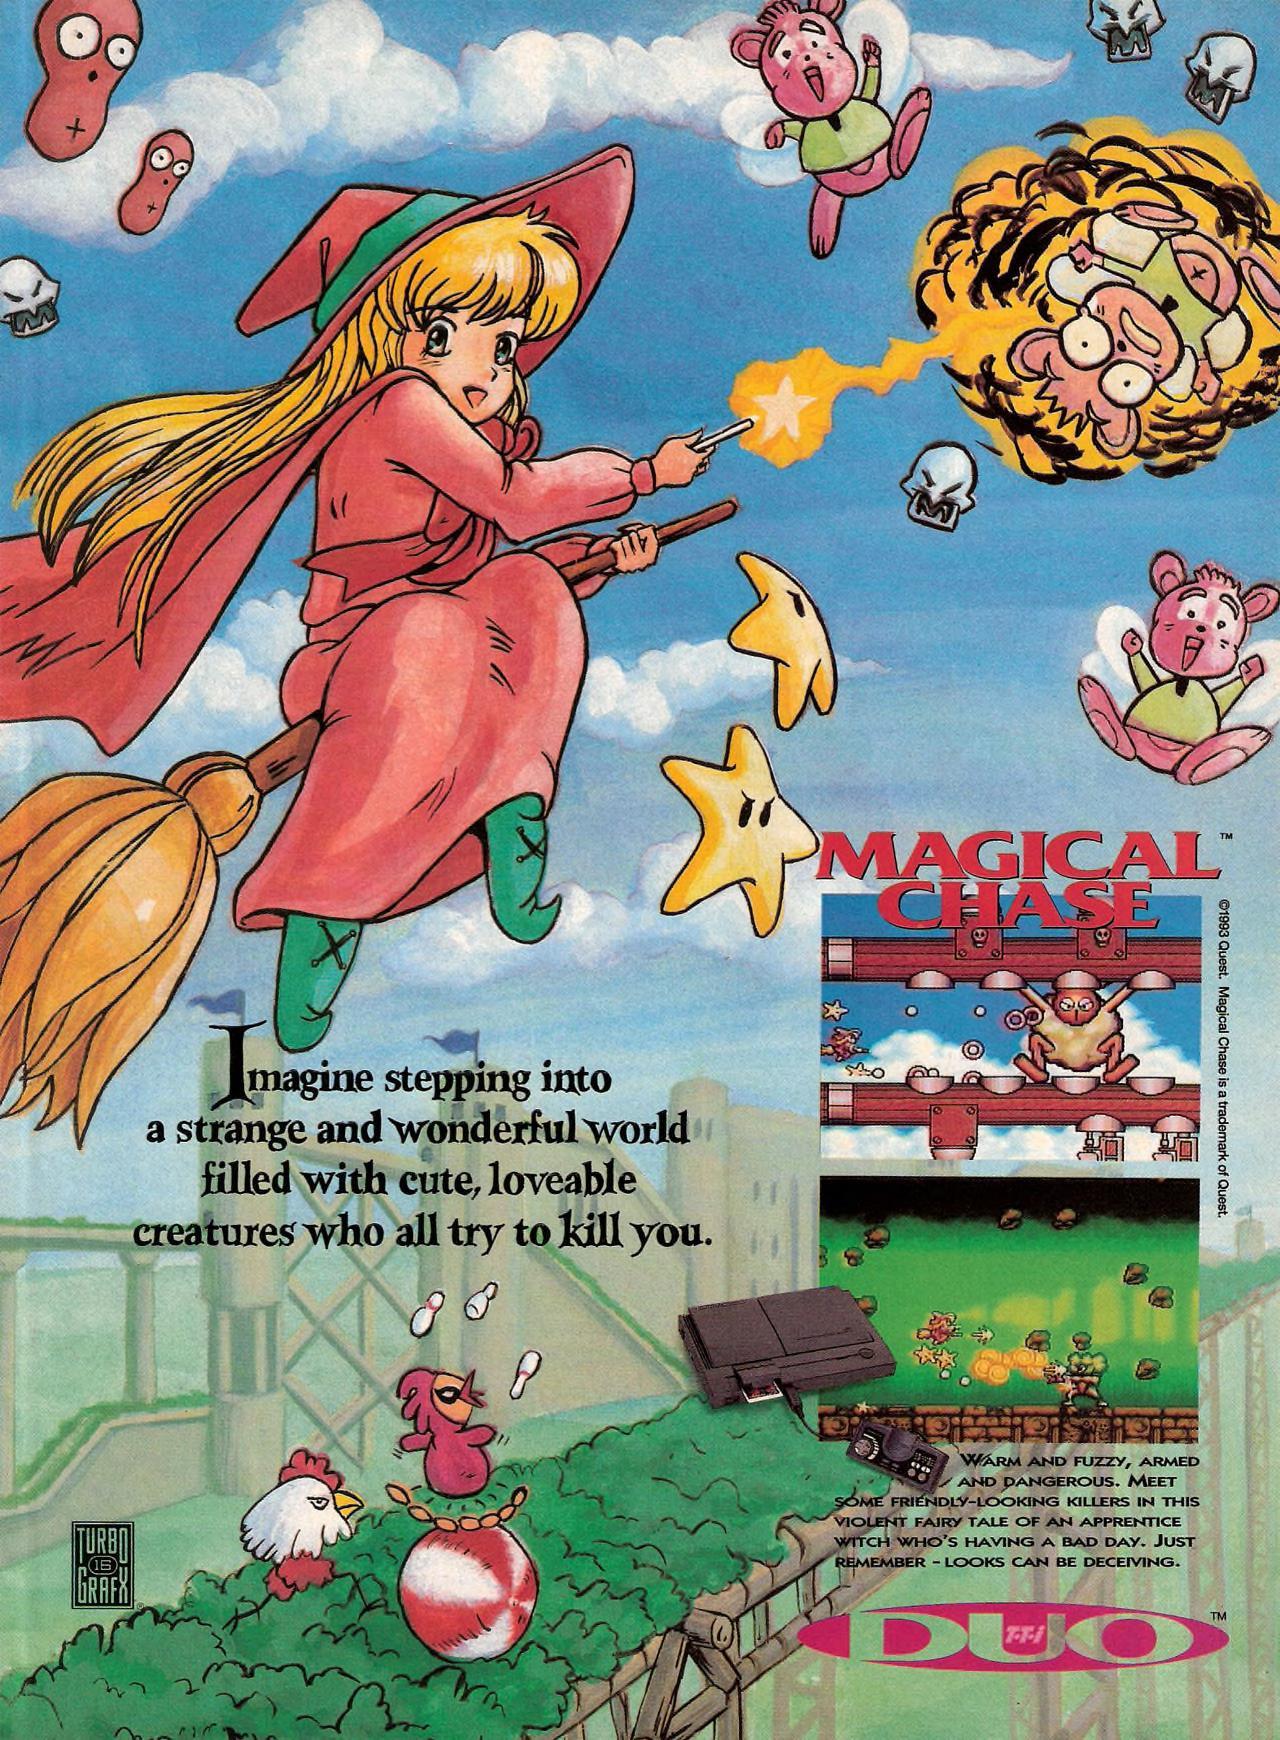 ‘Magical Chase’[TGCD] [USA] [MAGAZINE] [1993]
• GamePro, August 1993 (#49)
• Scanned by Phillyman, via RetroMags